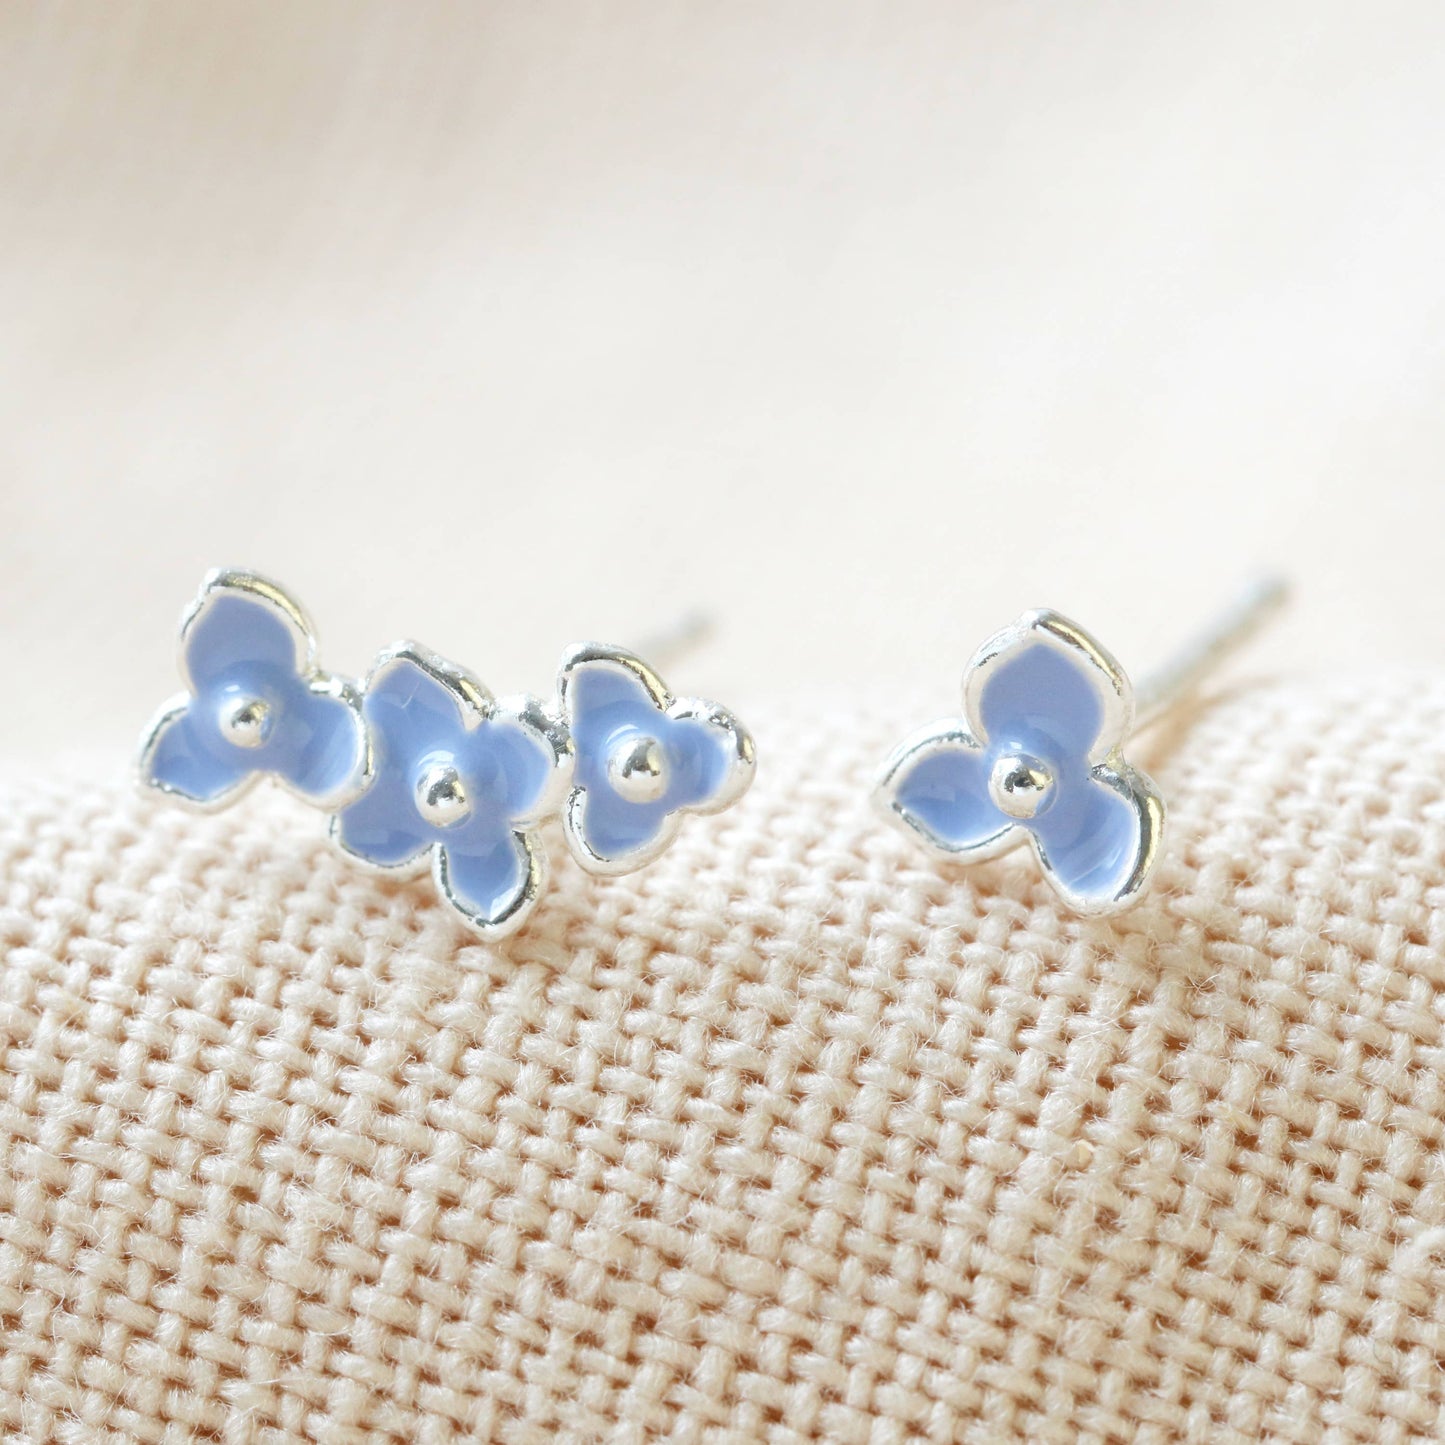 Tiny Forget me not flower earrings